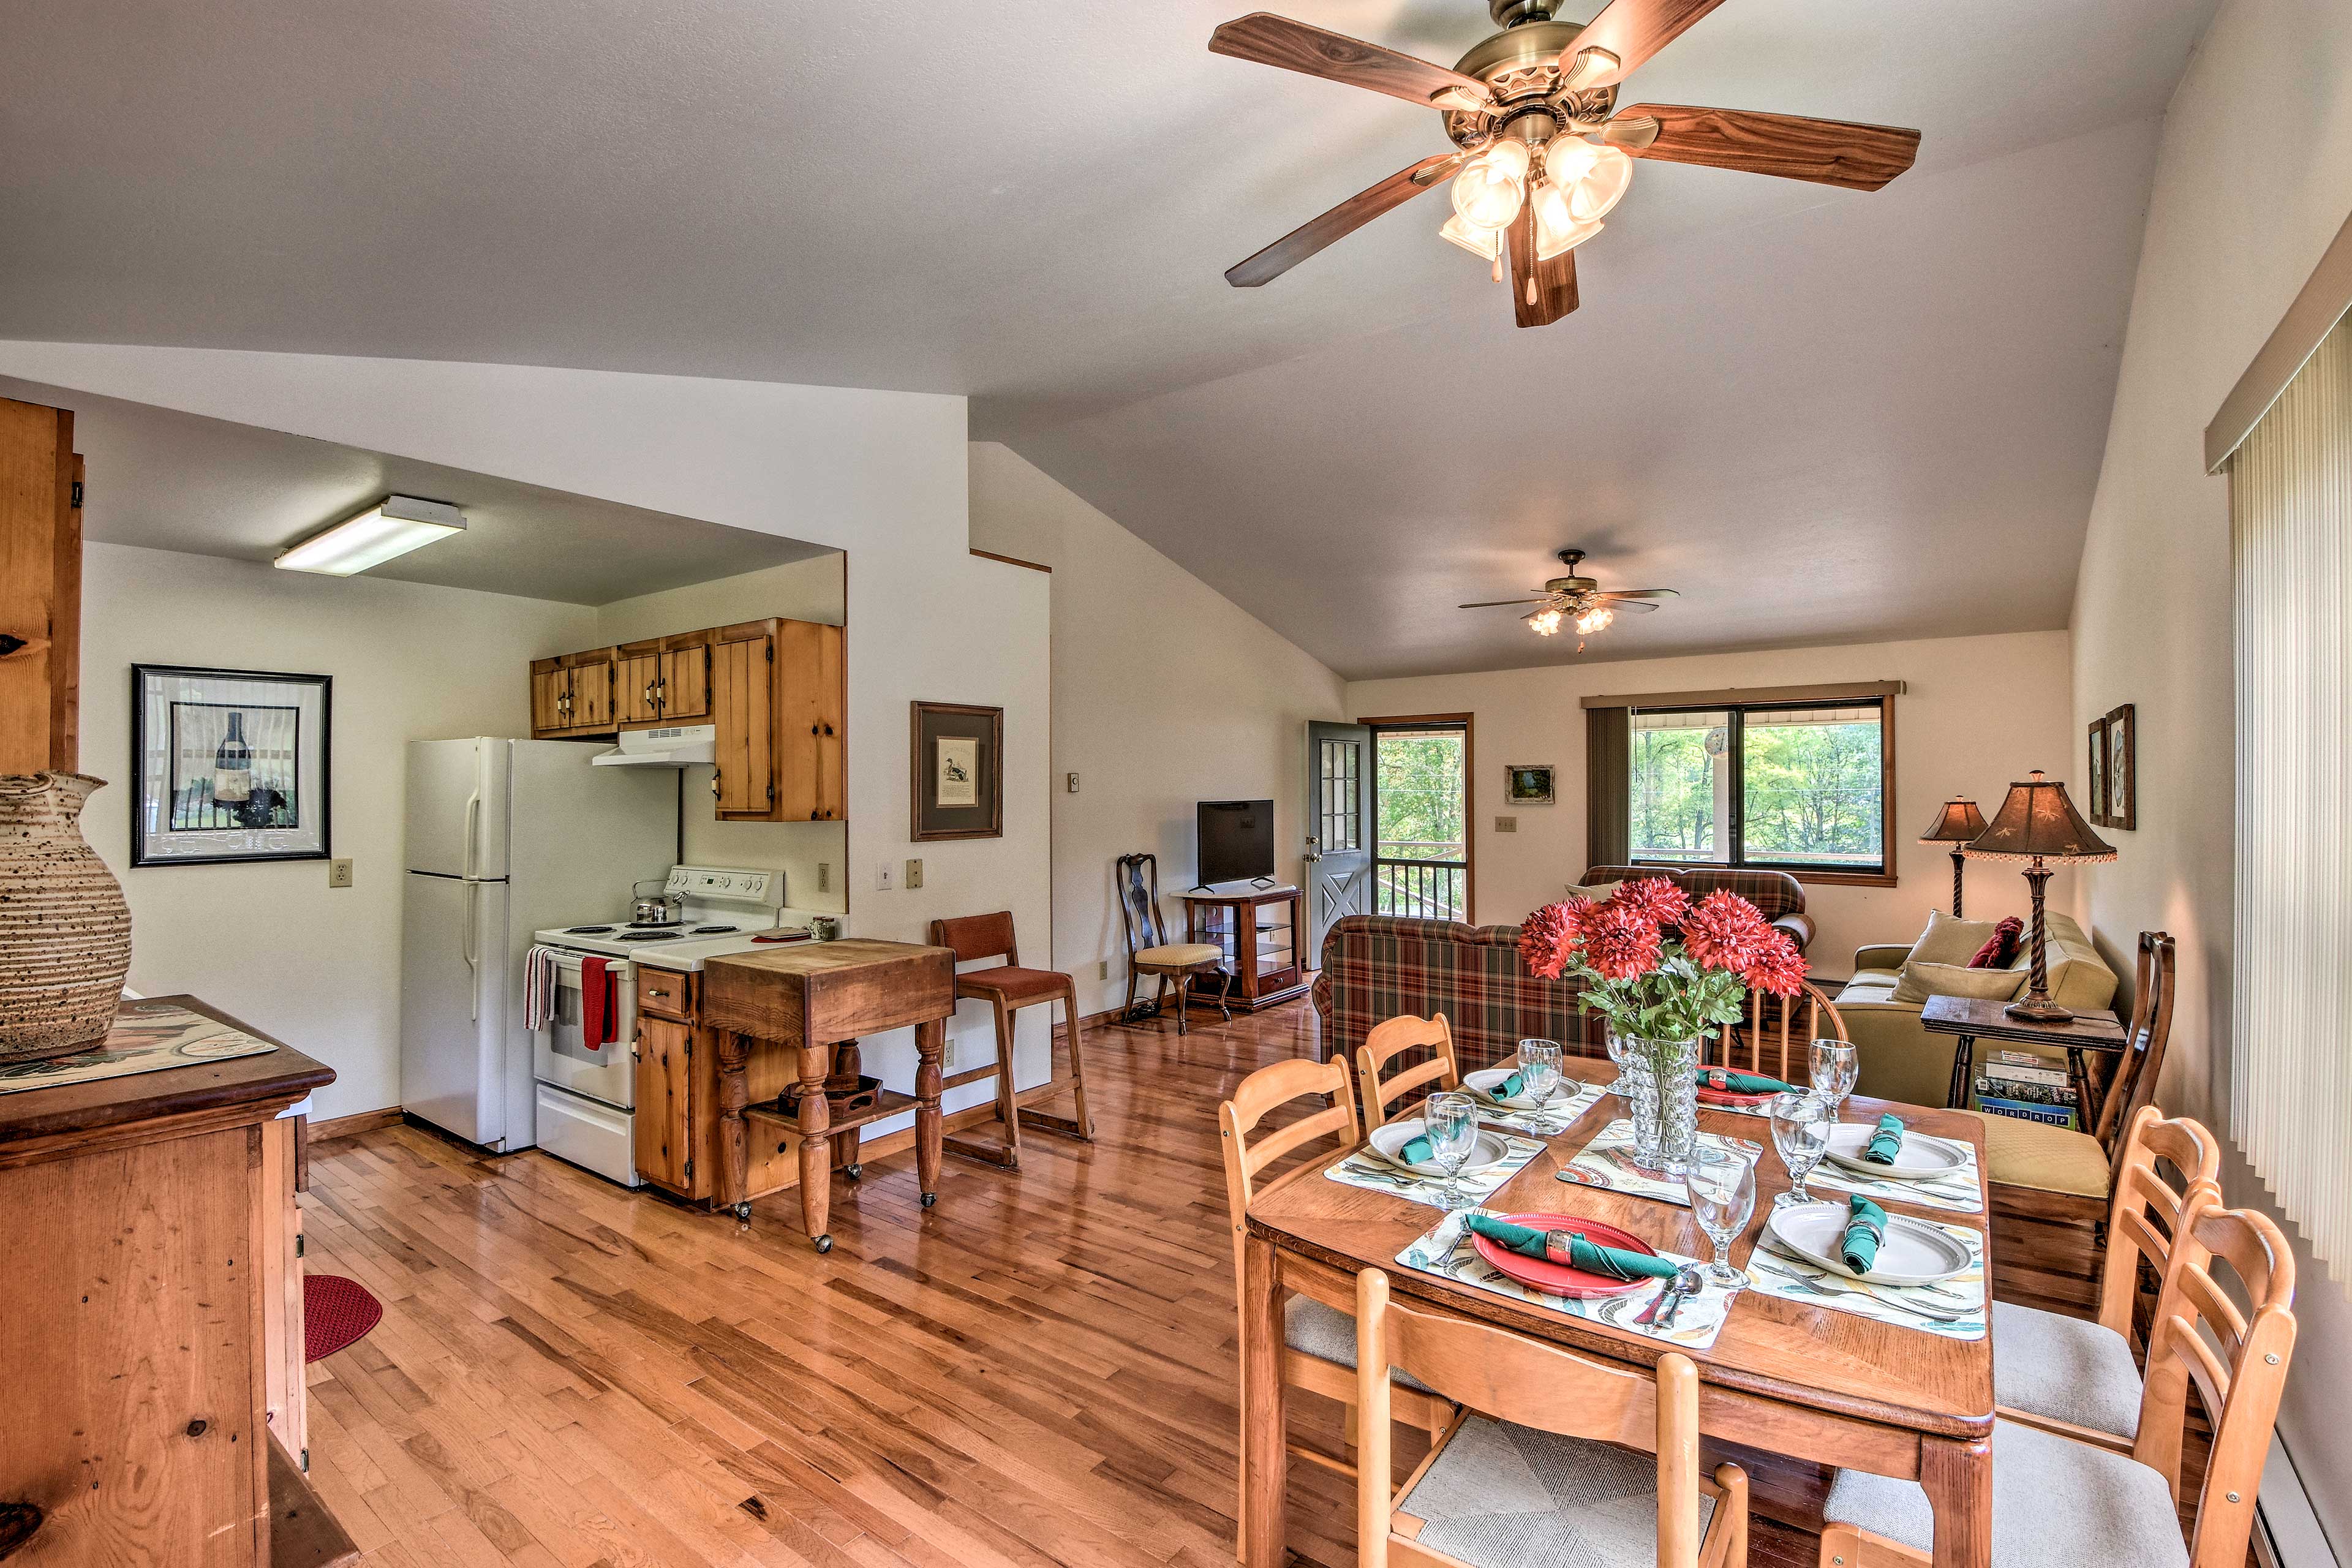 The open floor plan makes it easy to spend time with friends and family.